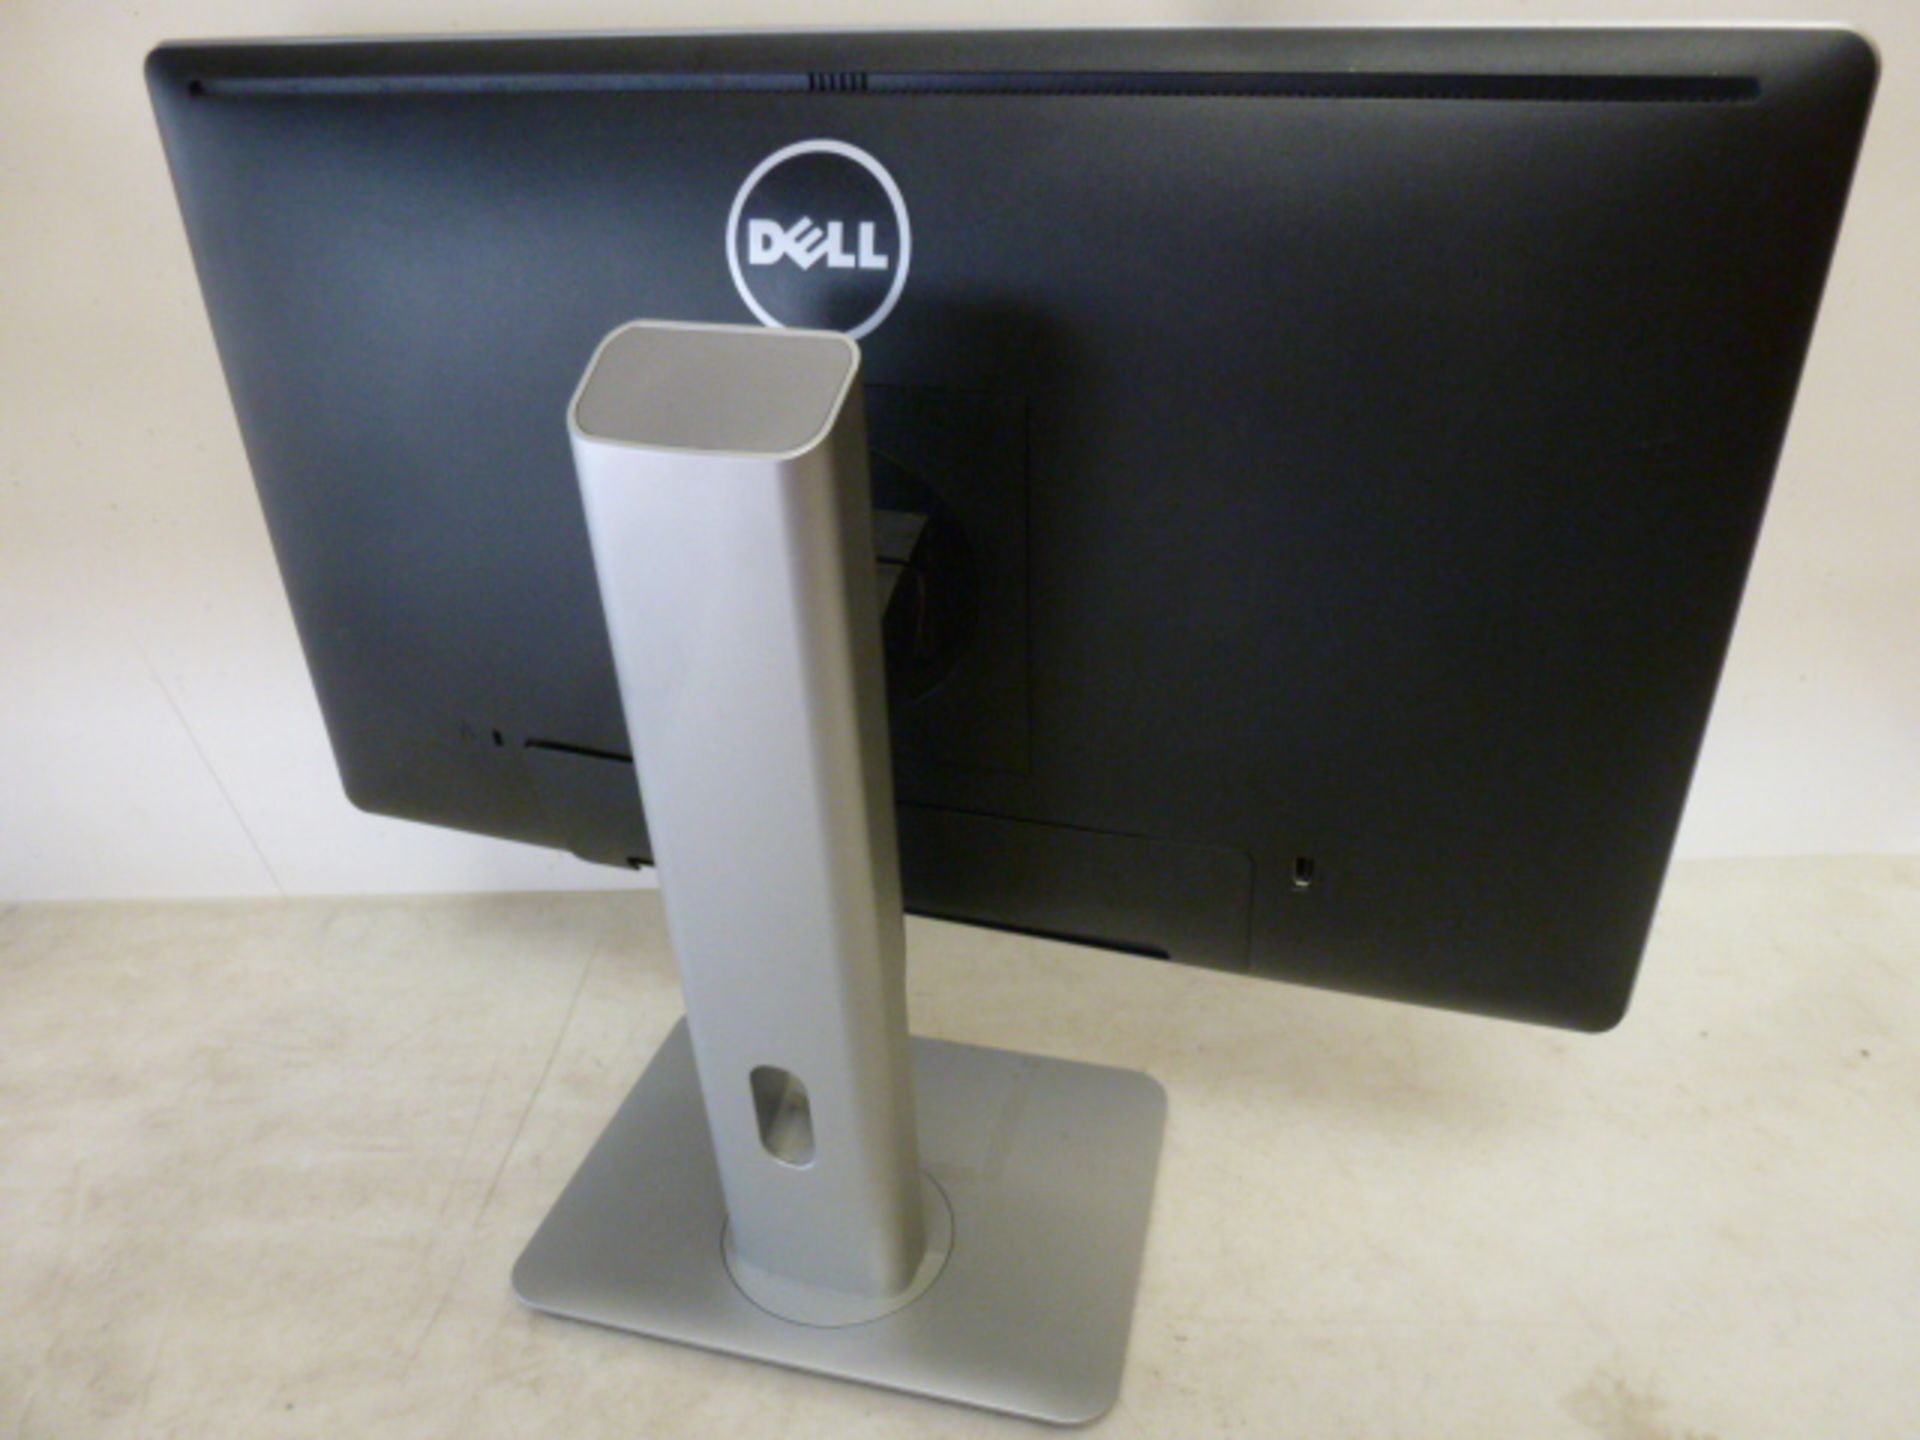 Dell 22" Widescreen LCD Monitor Model P2214Hb. Comes with Power Supply & VGA - Image 2 of 2